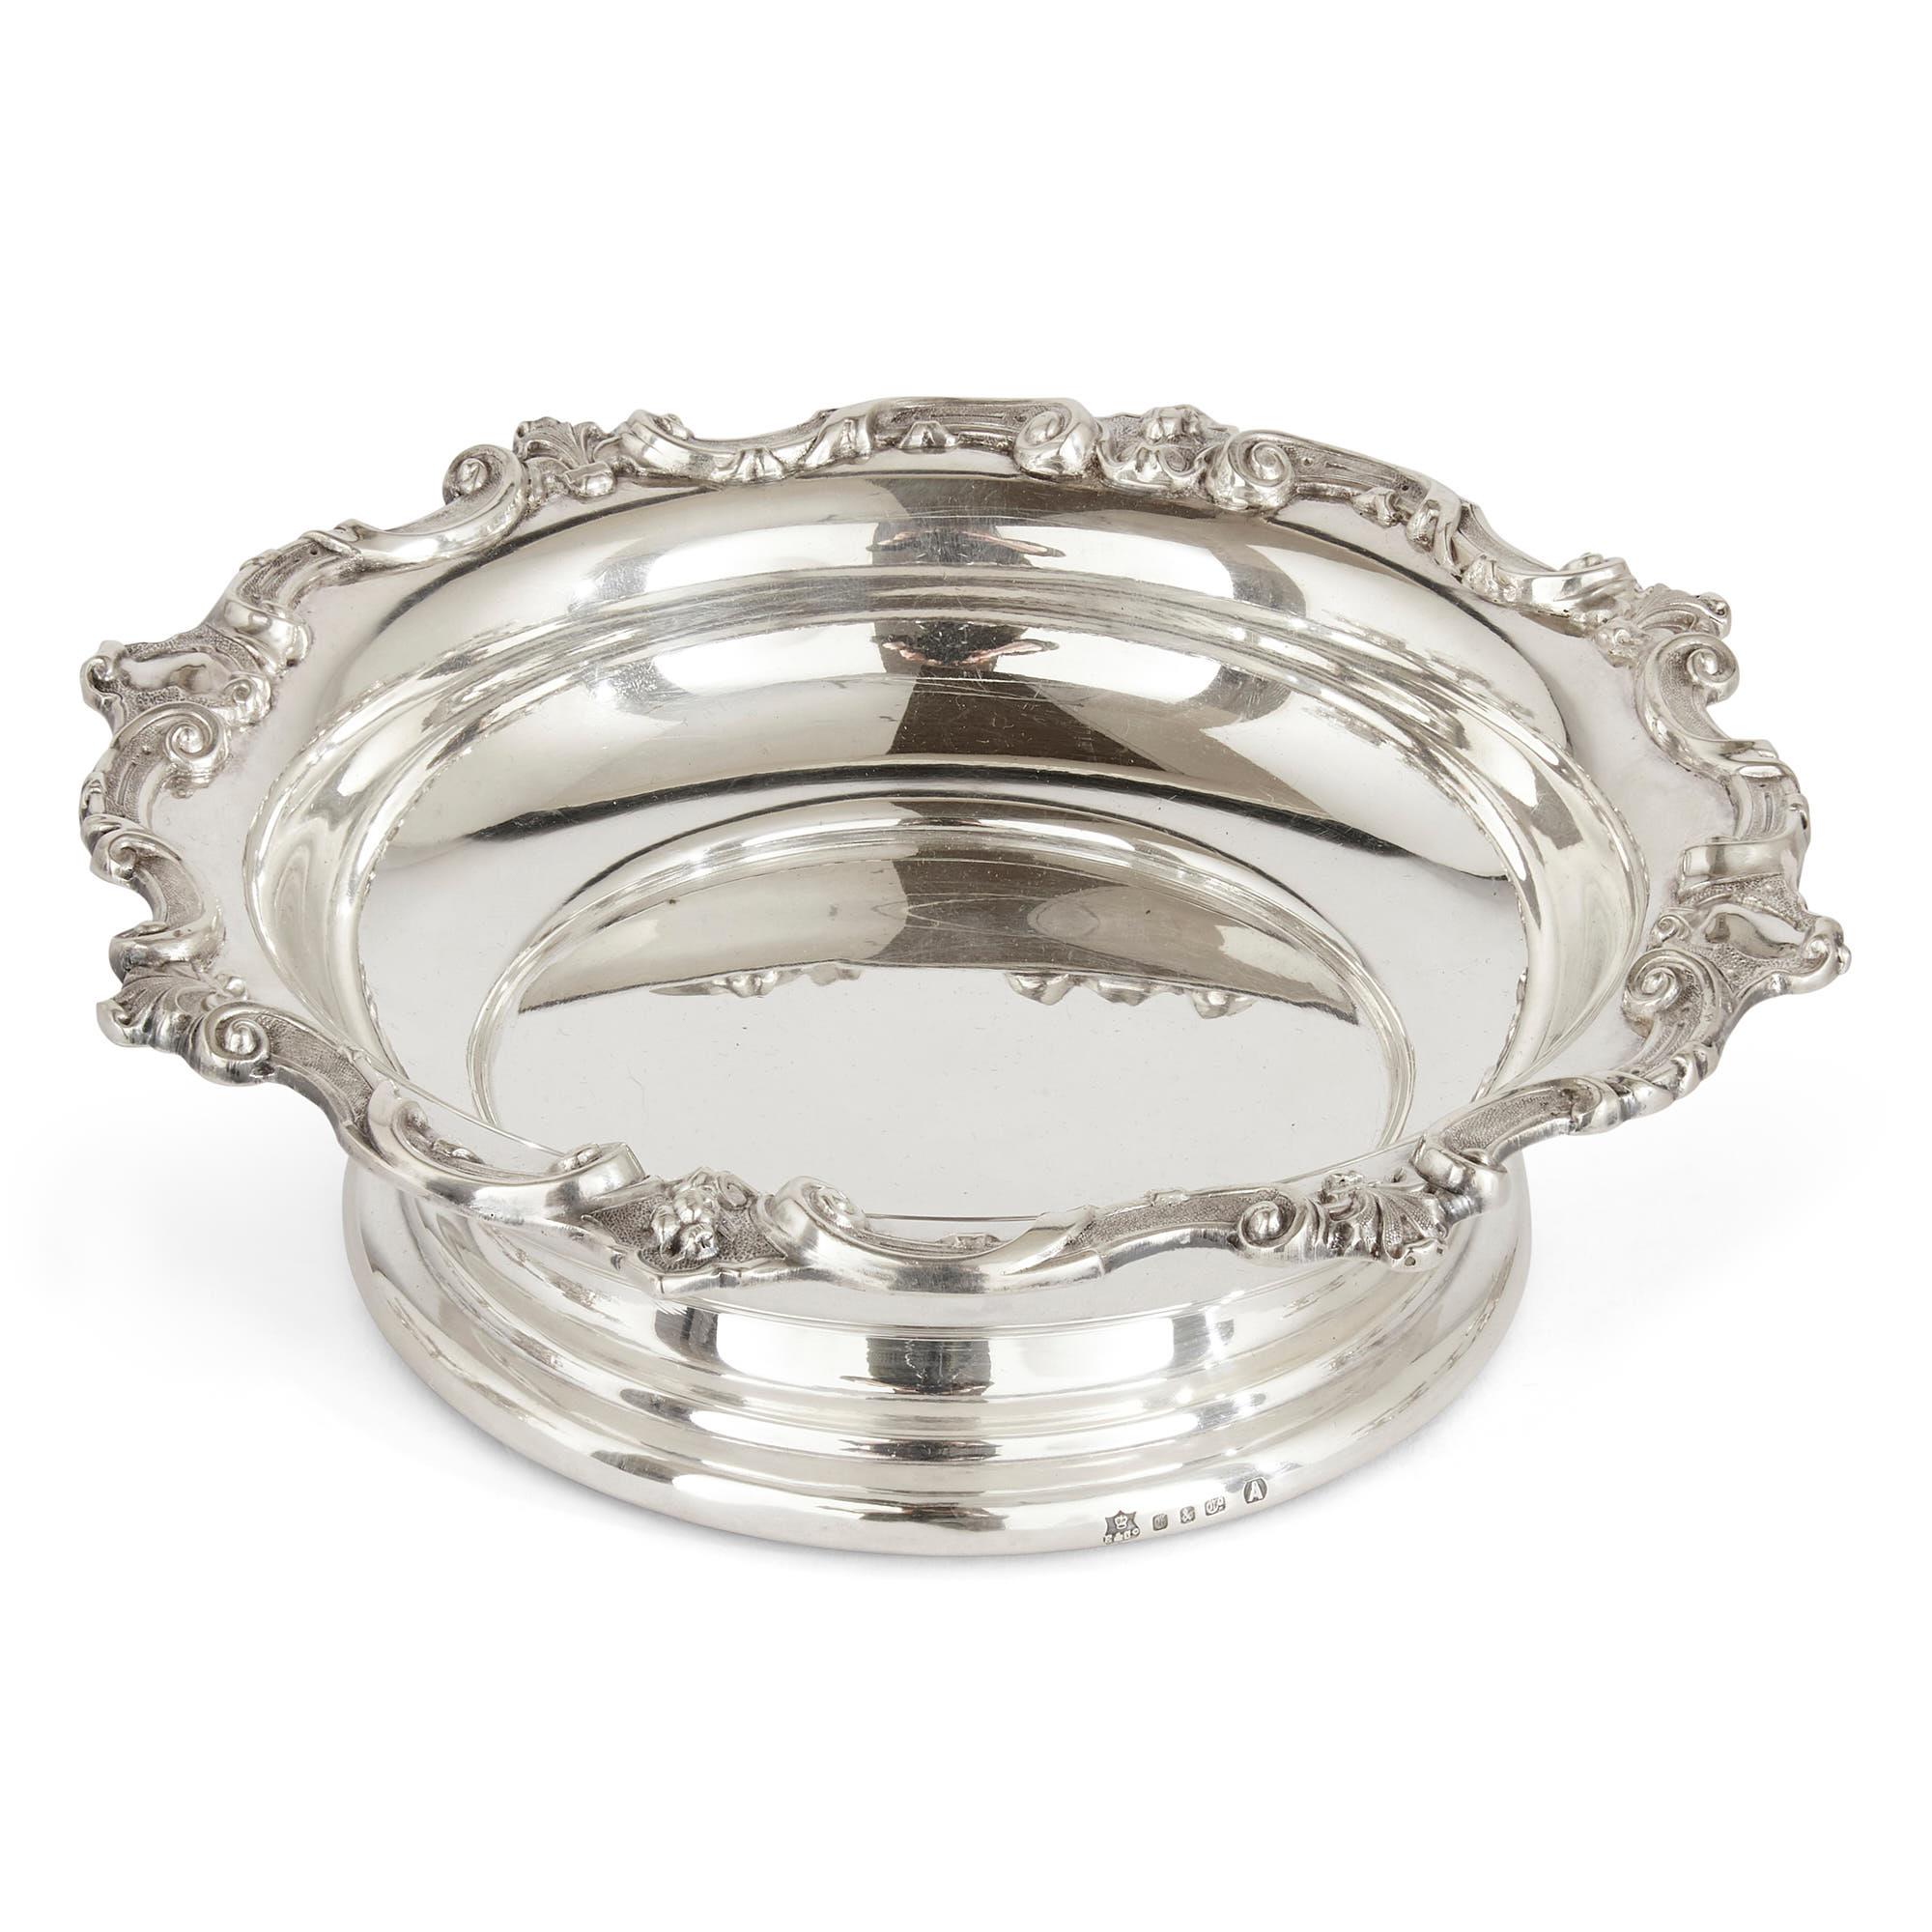 19th Century Extensive Silver-Plate Table Service by English Firm Elkington For Sale